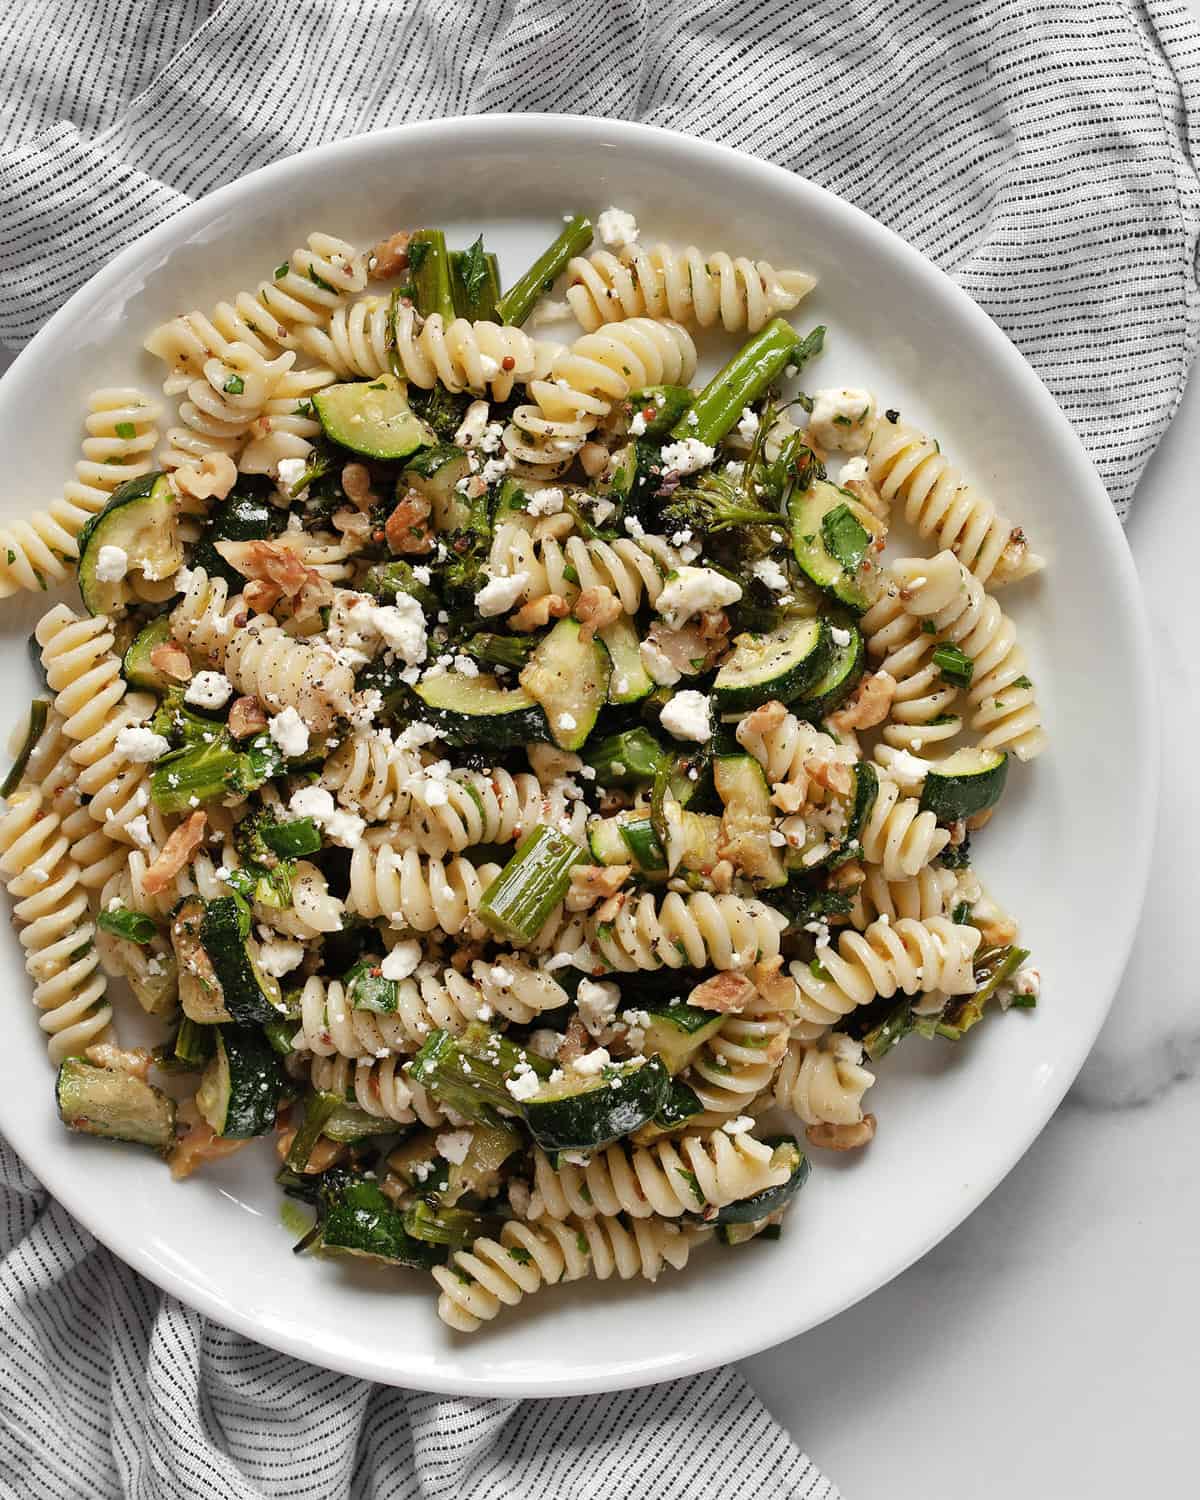 Pasta salad with roasted broccolini and zucchini on a plate.